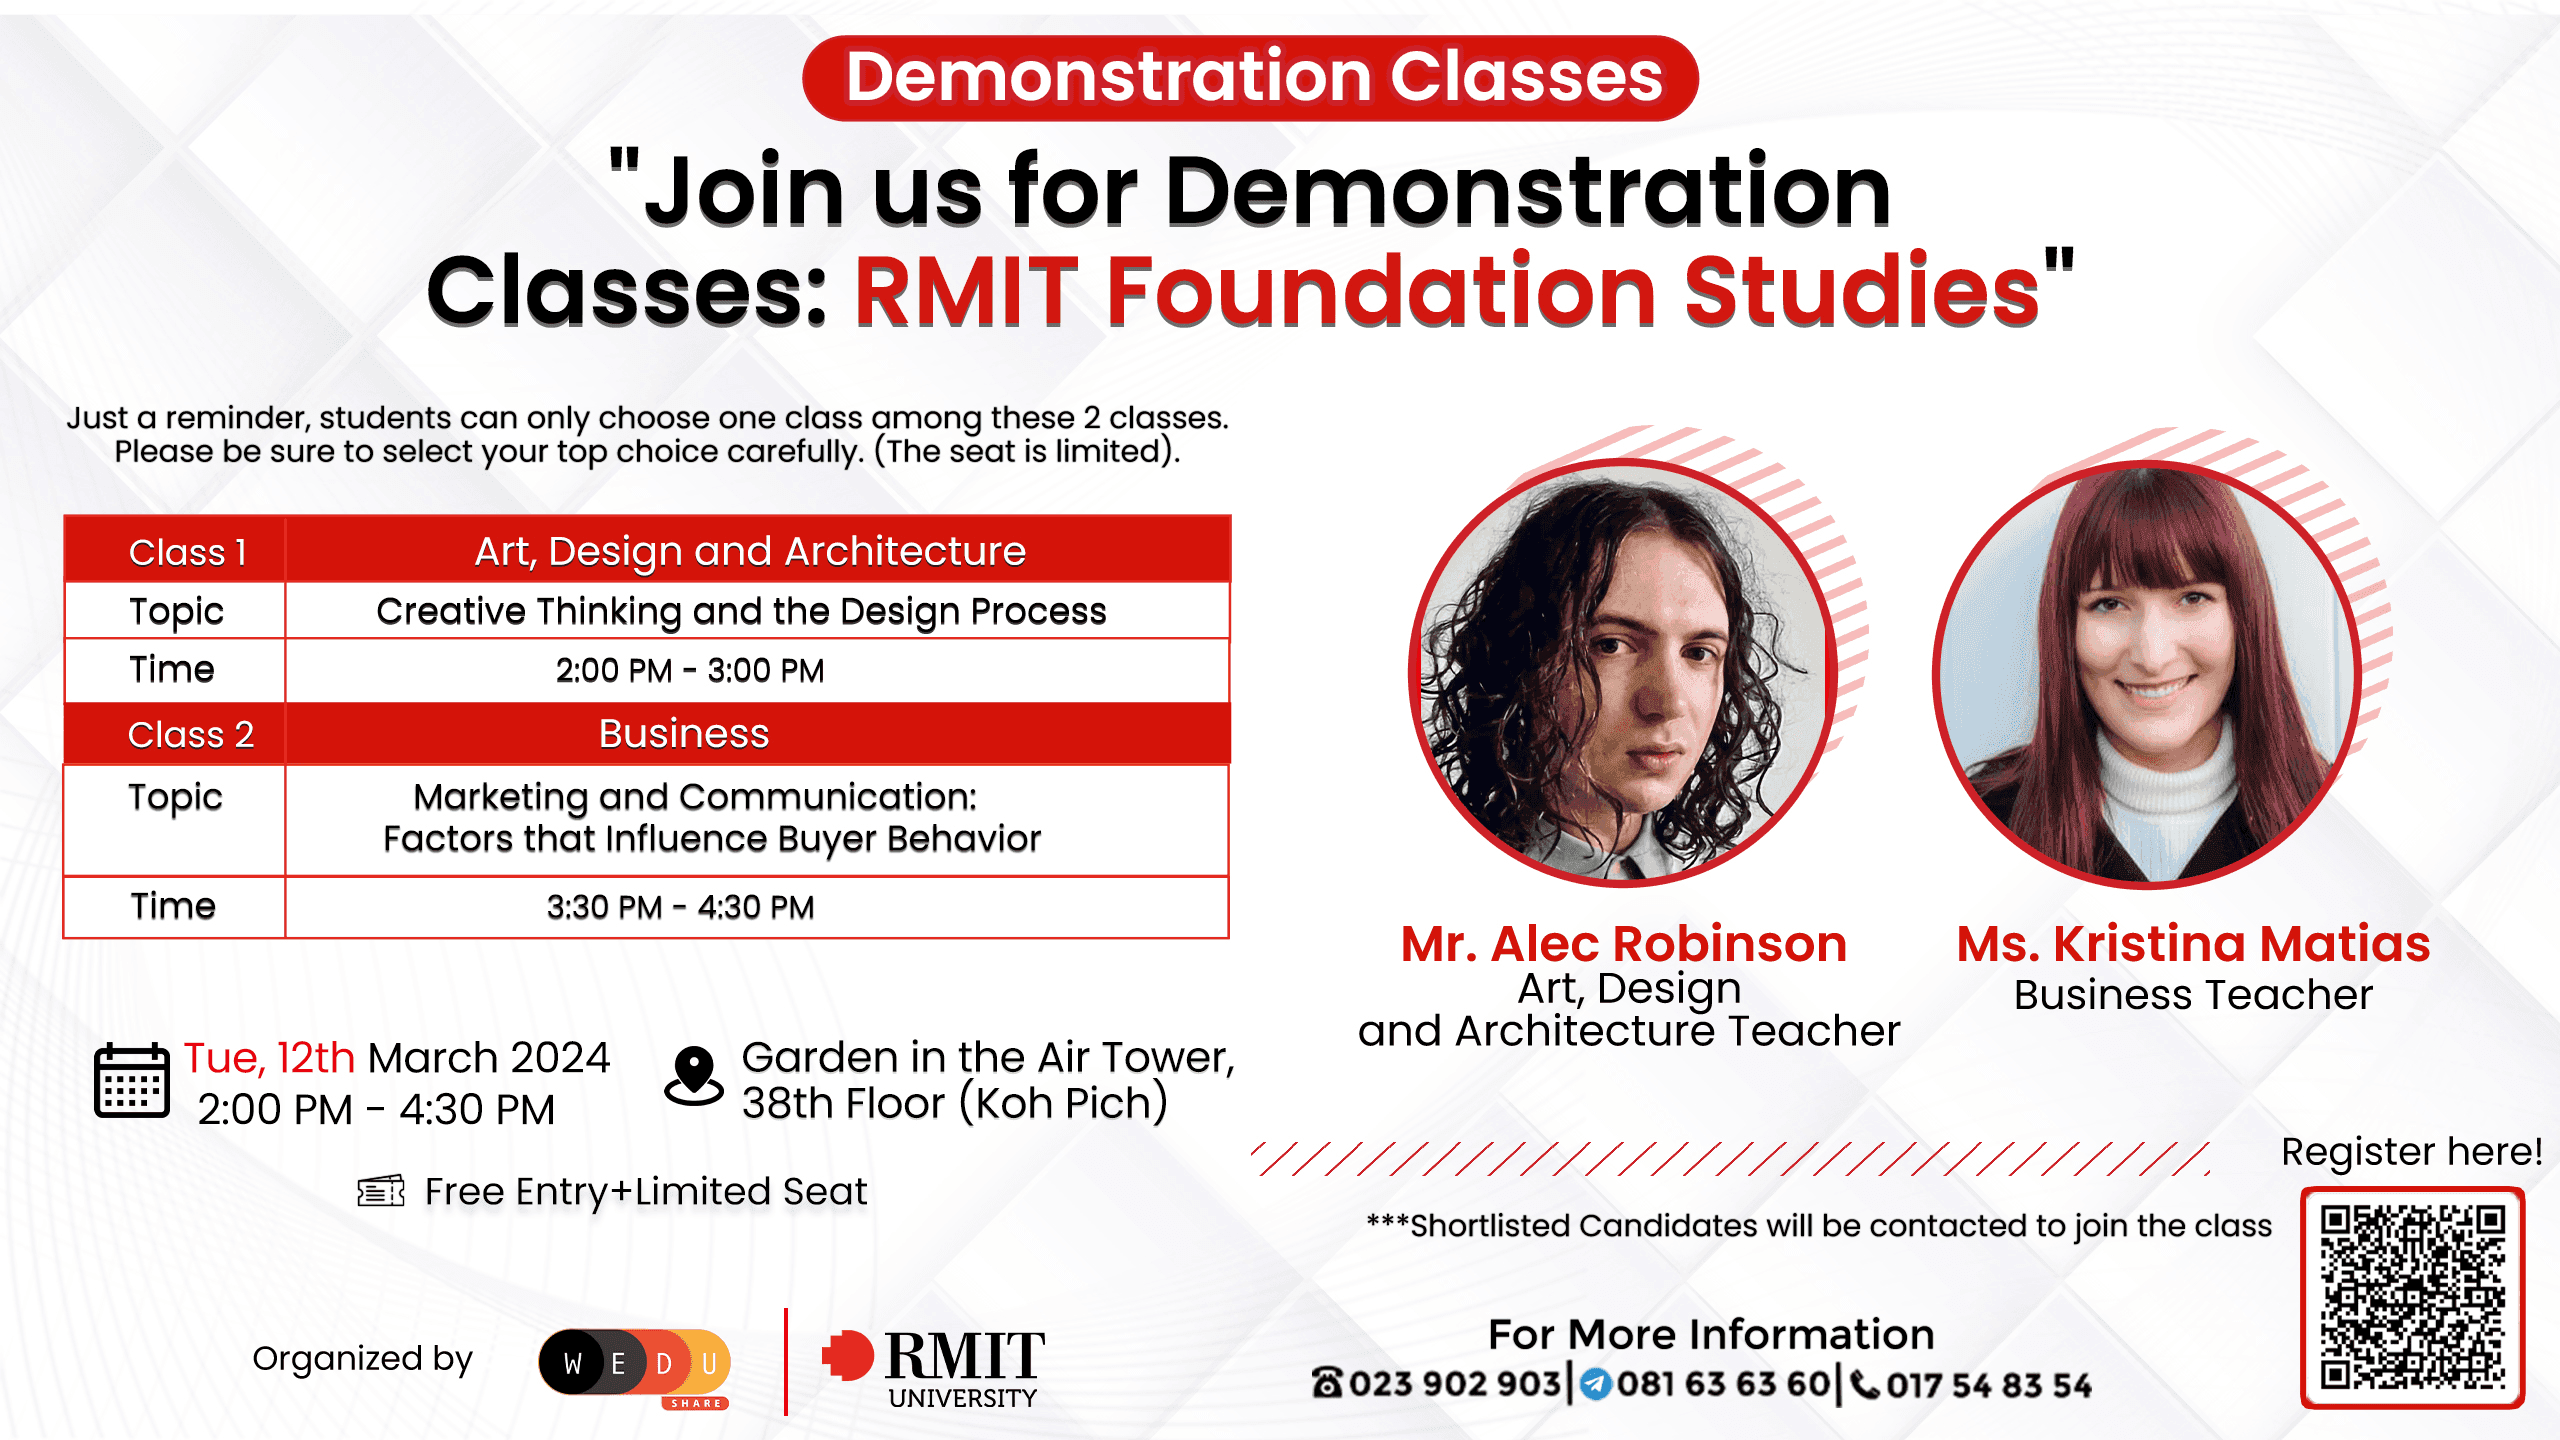 Join us for Demonstration Classes: RMIT Foundation Studies